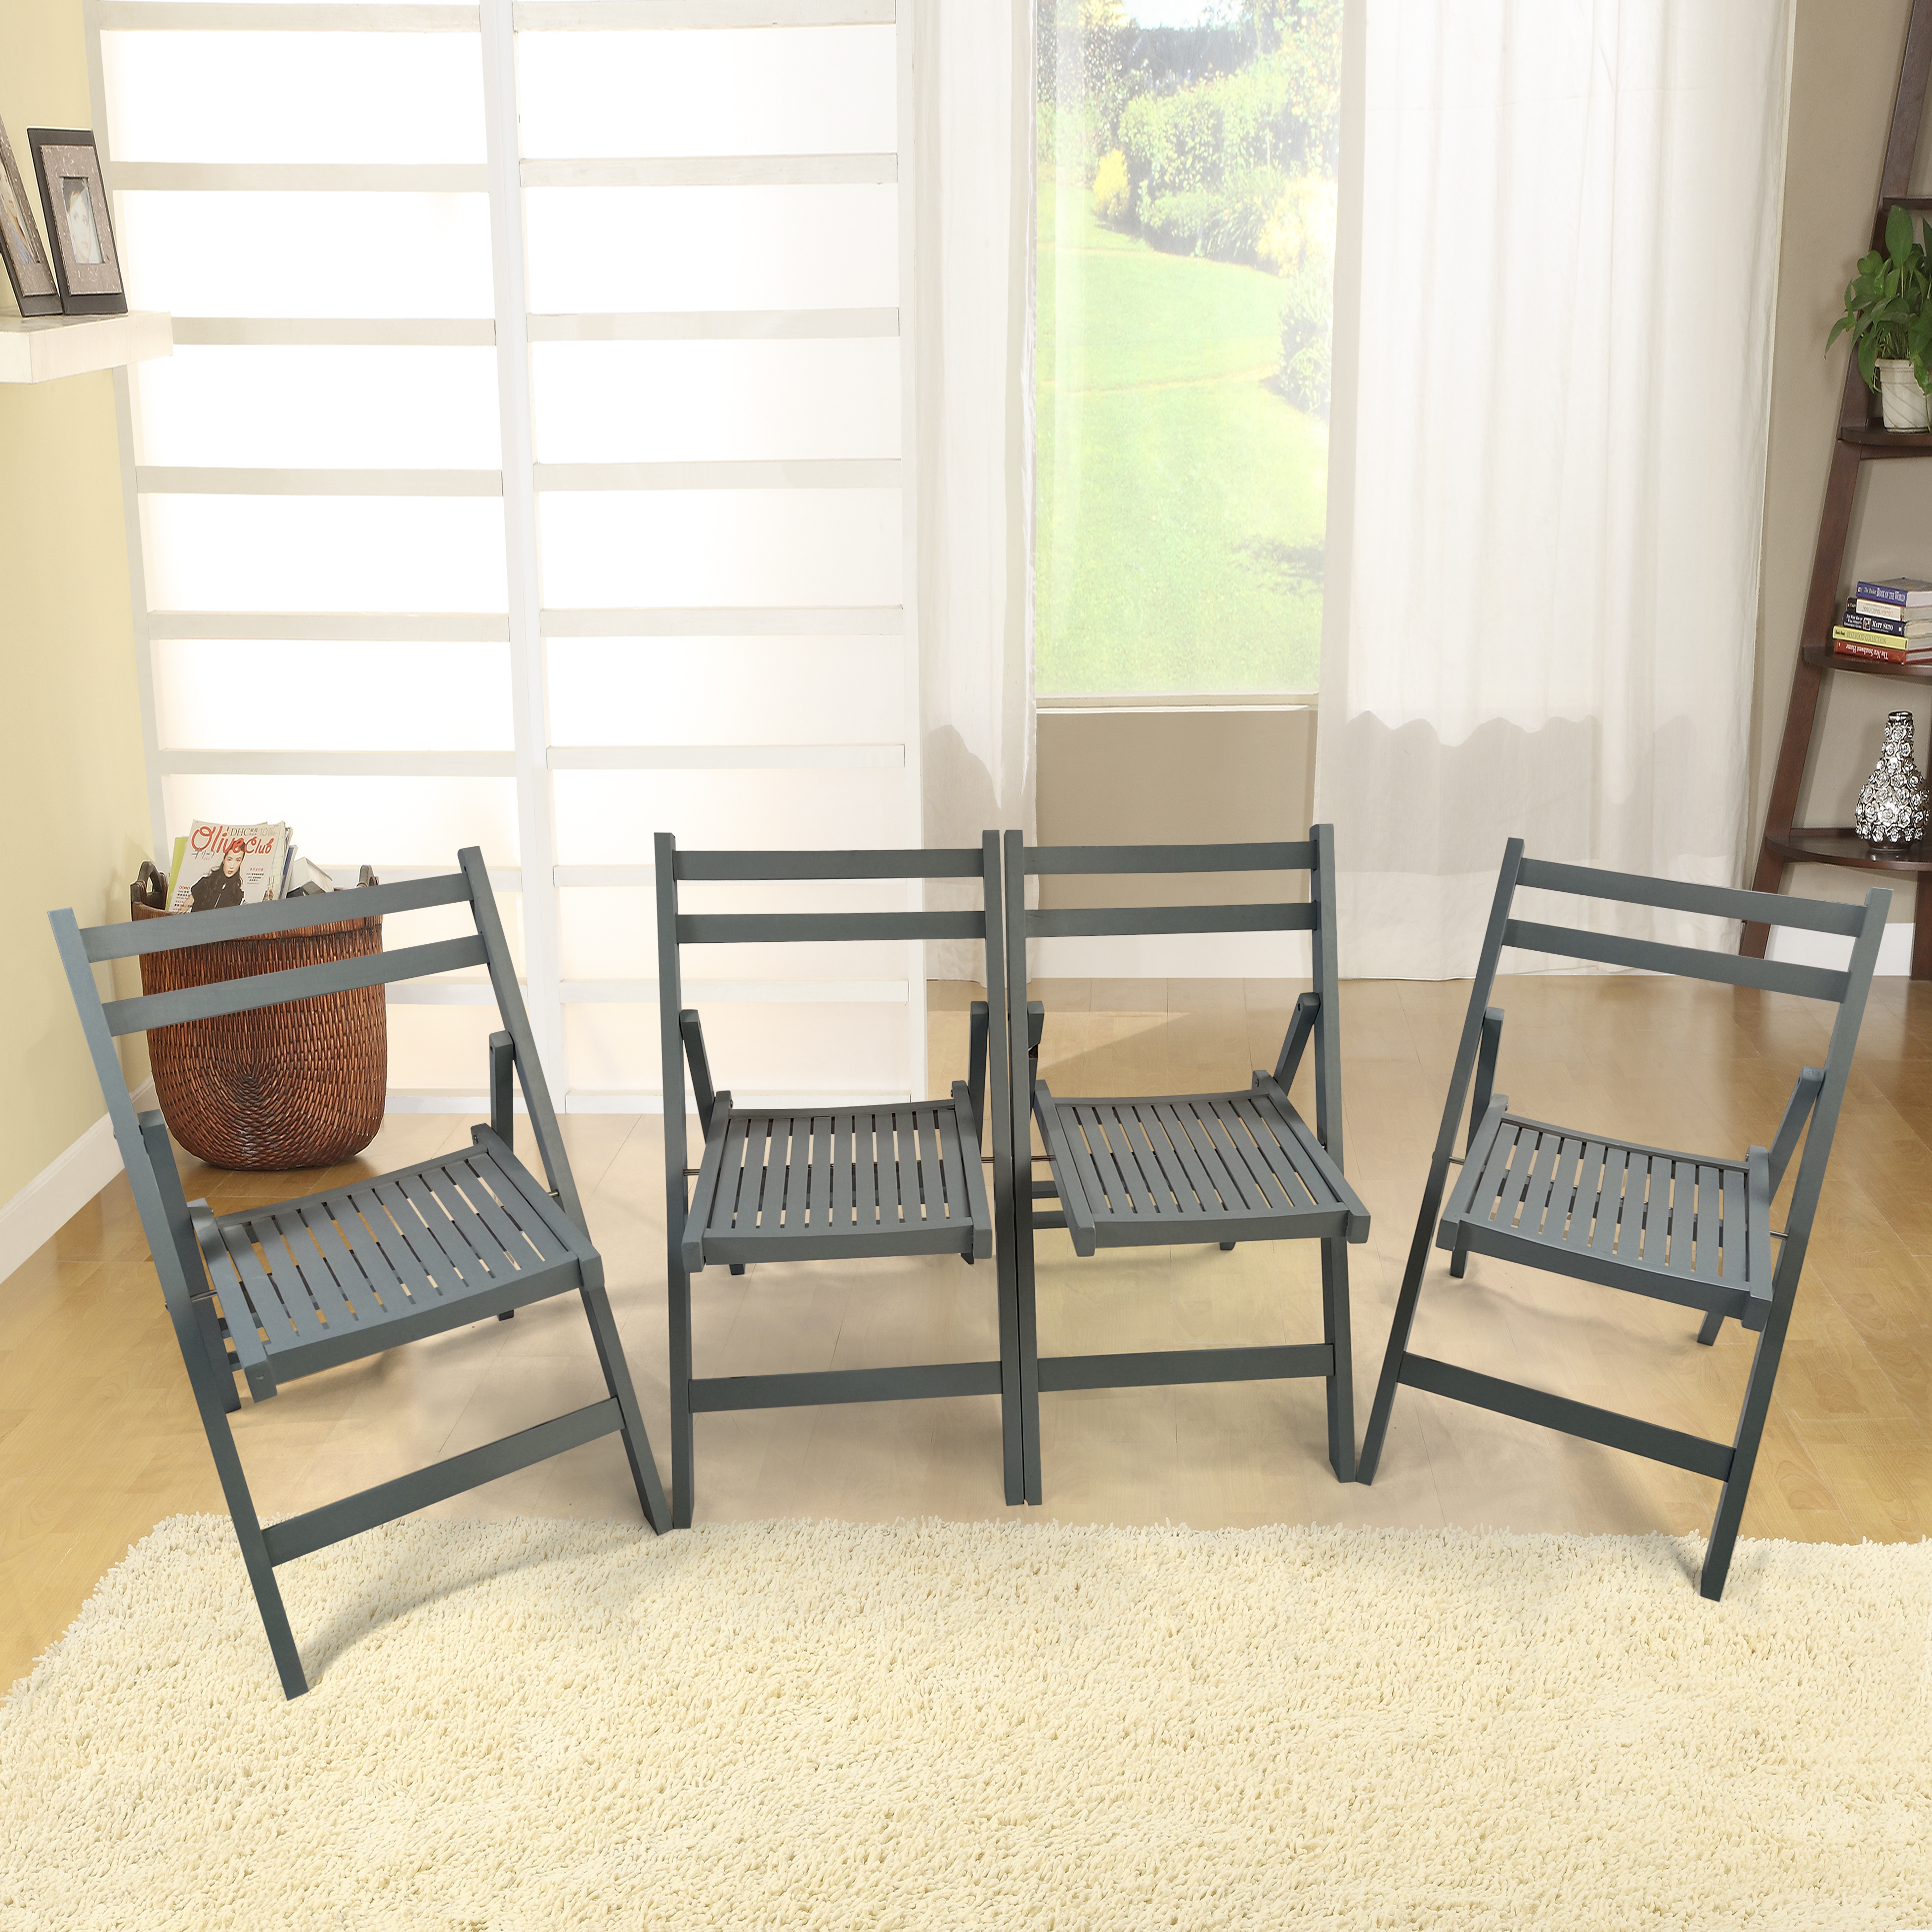 Furniture Slatted Wood Folding Special Event Chair - Gray, Set of 4 ，FOLDING CHAIR, FOLDABLE STYLE-Boyel Living